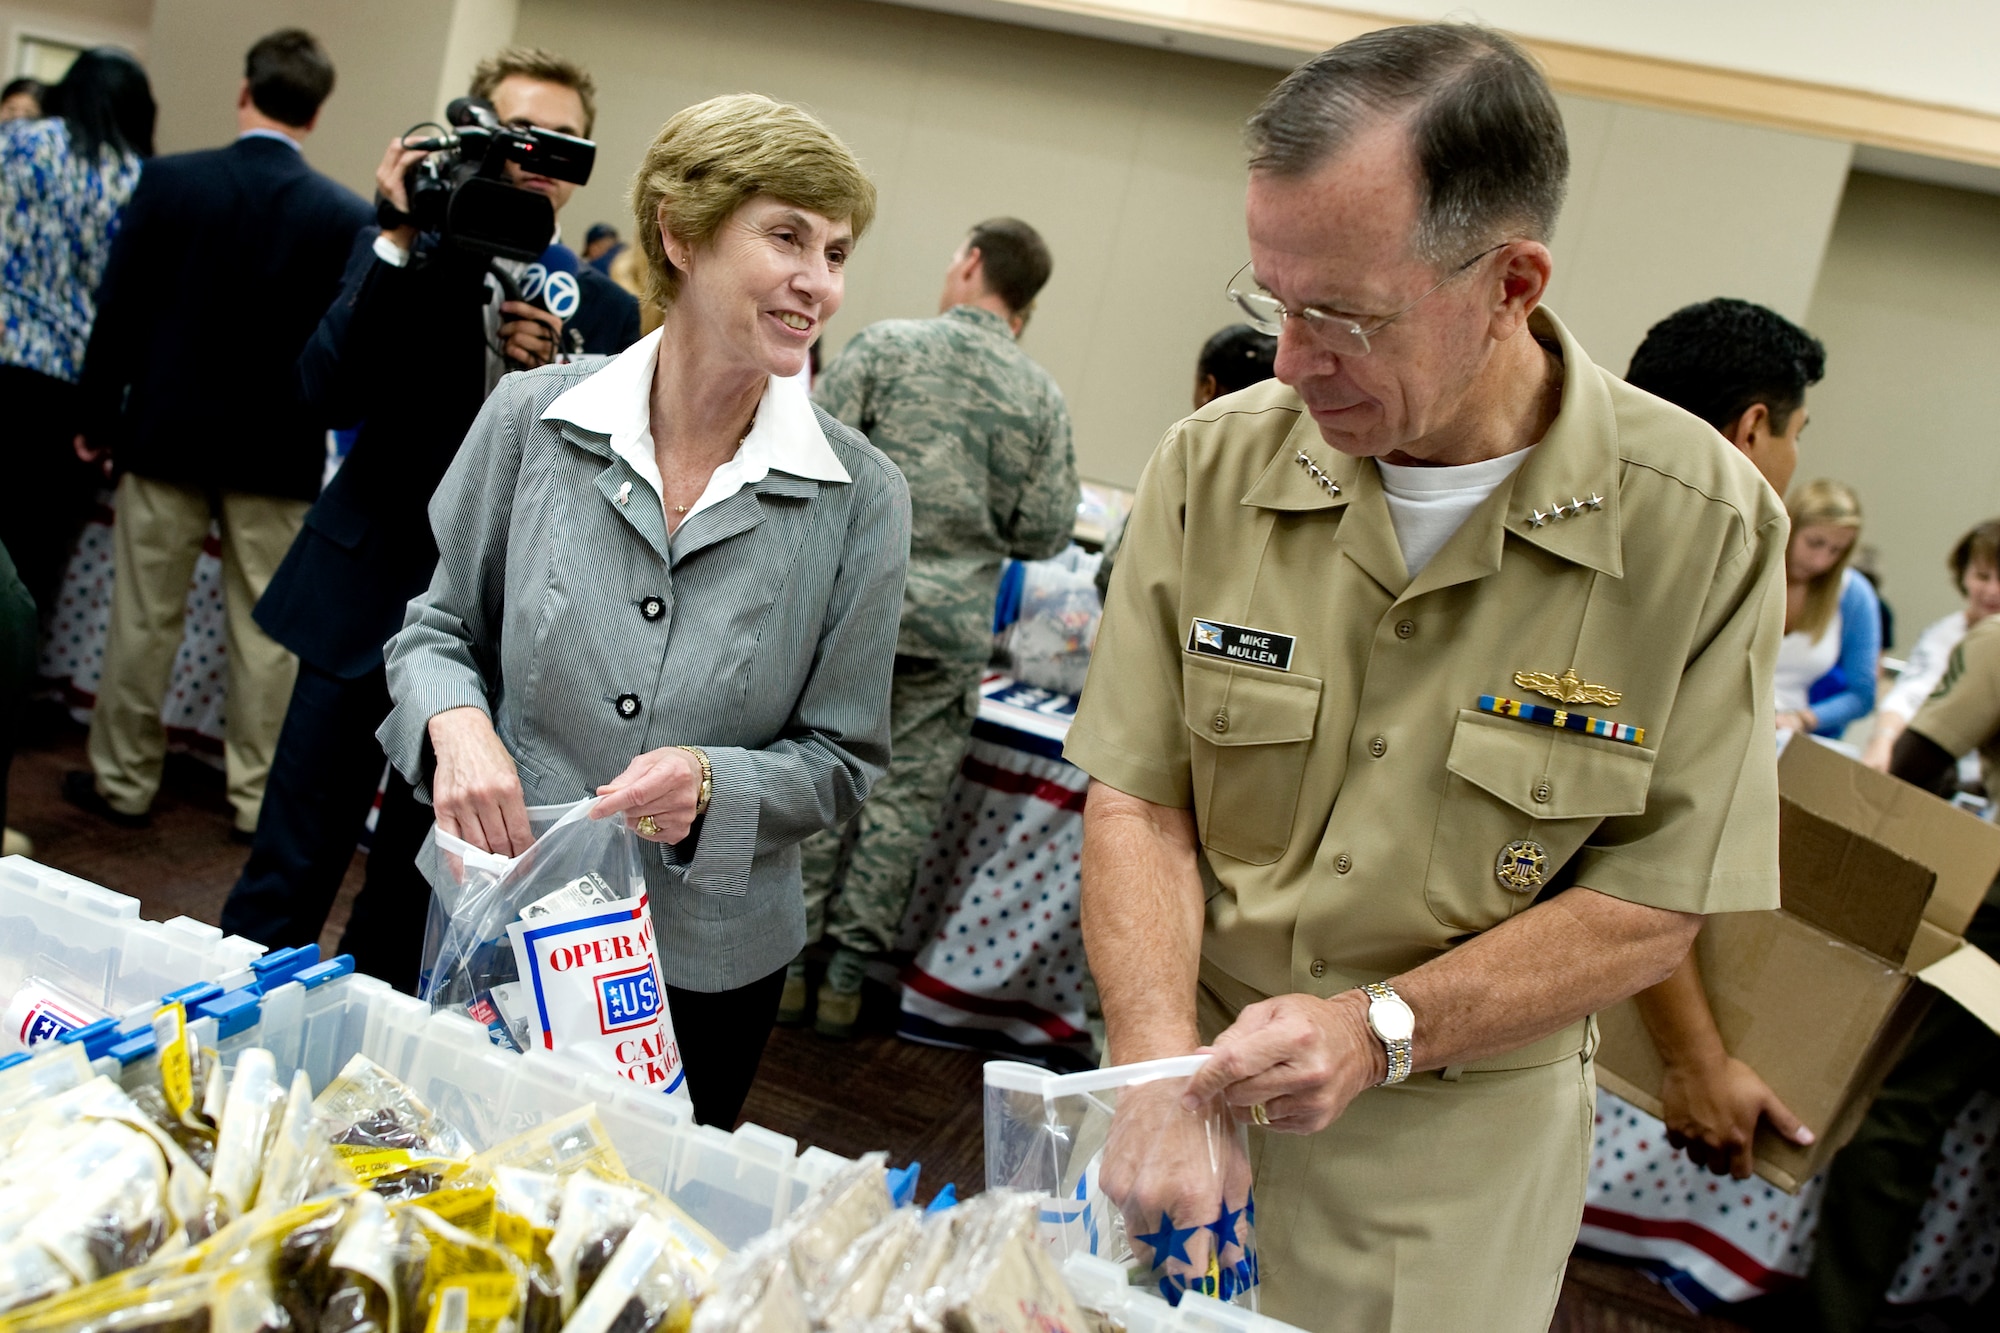 Adm. Mike Mullen, chairman of the Joint Chiefs of Staff, and his wife Deborah participate in the USO care package packing party at the Pentagon, July 2, 2010.  The packages contain items such as international calling cards, toiletries and entertainment items that provide a touch of home to servicemembers. In the most recent podcast to troops, Admiral and Mrs. Mullen discussed stresses on military families and efforts to alleviate them.  (Defense Department photo/Petty Officer 1st Class Chad J. McNeeley)